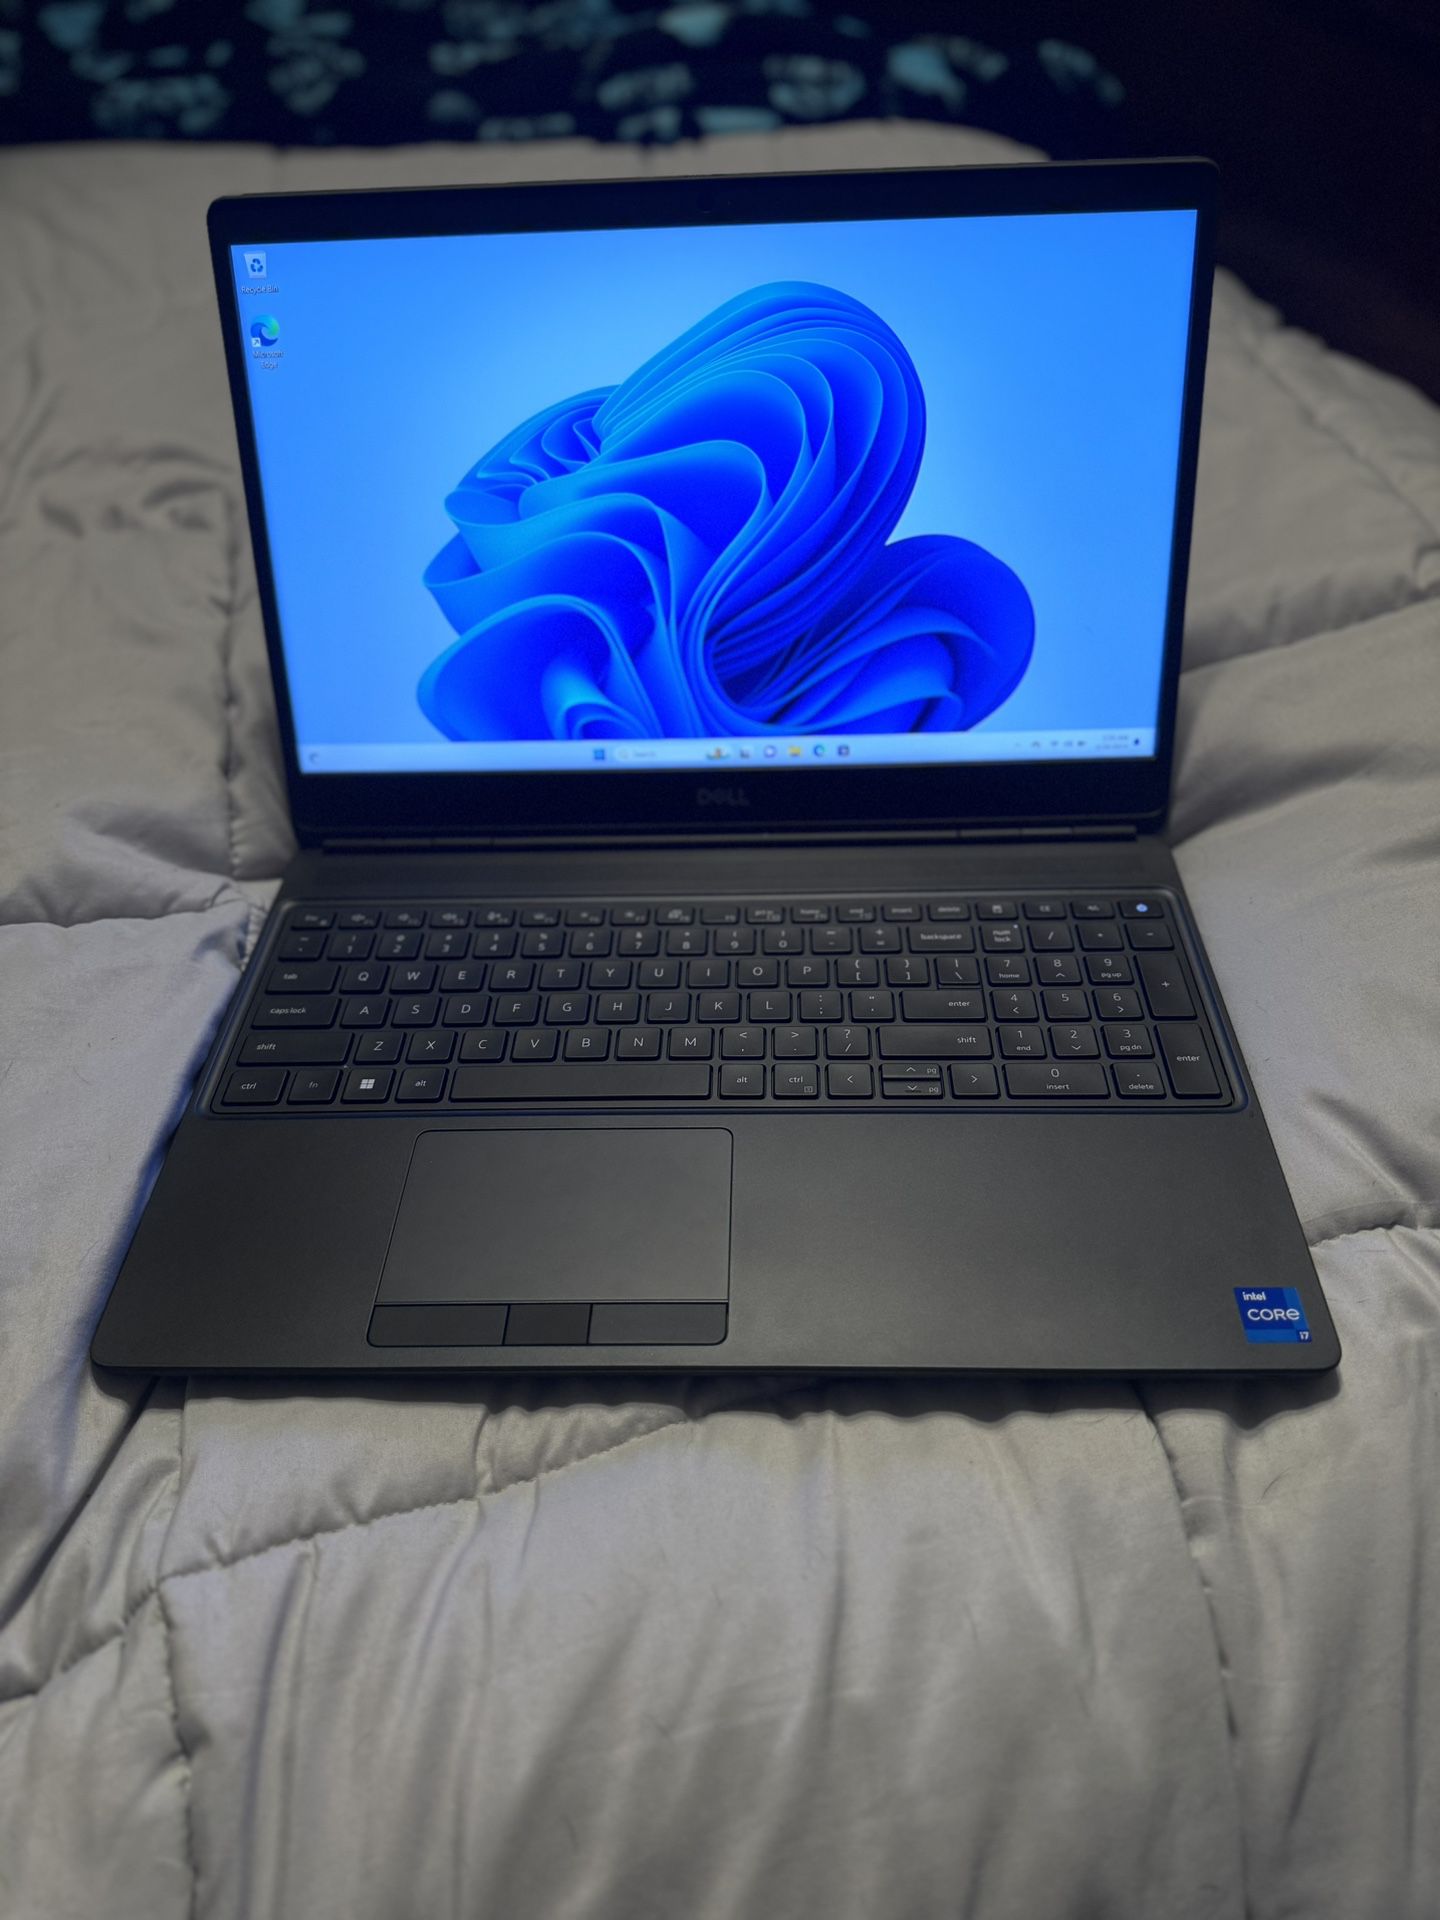 Dell Precision 7560 Engineering Laptop